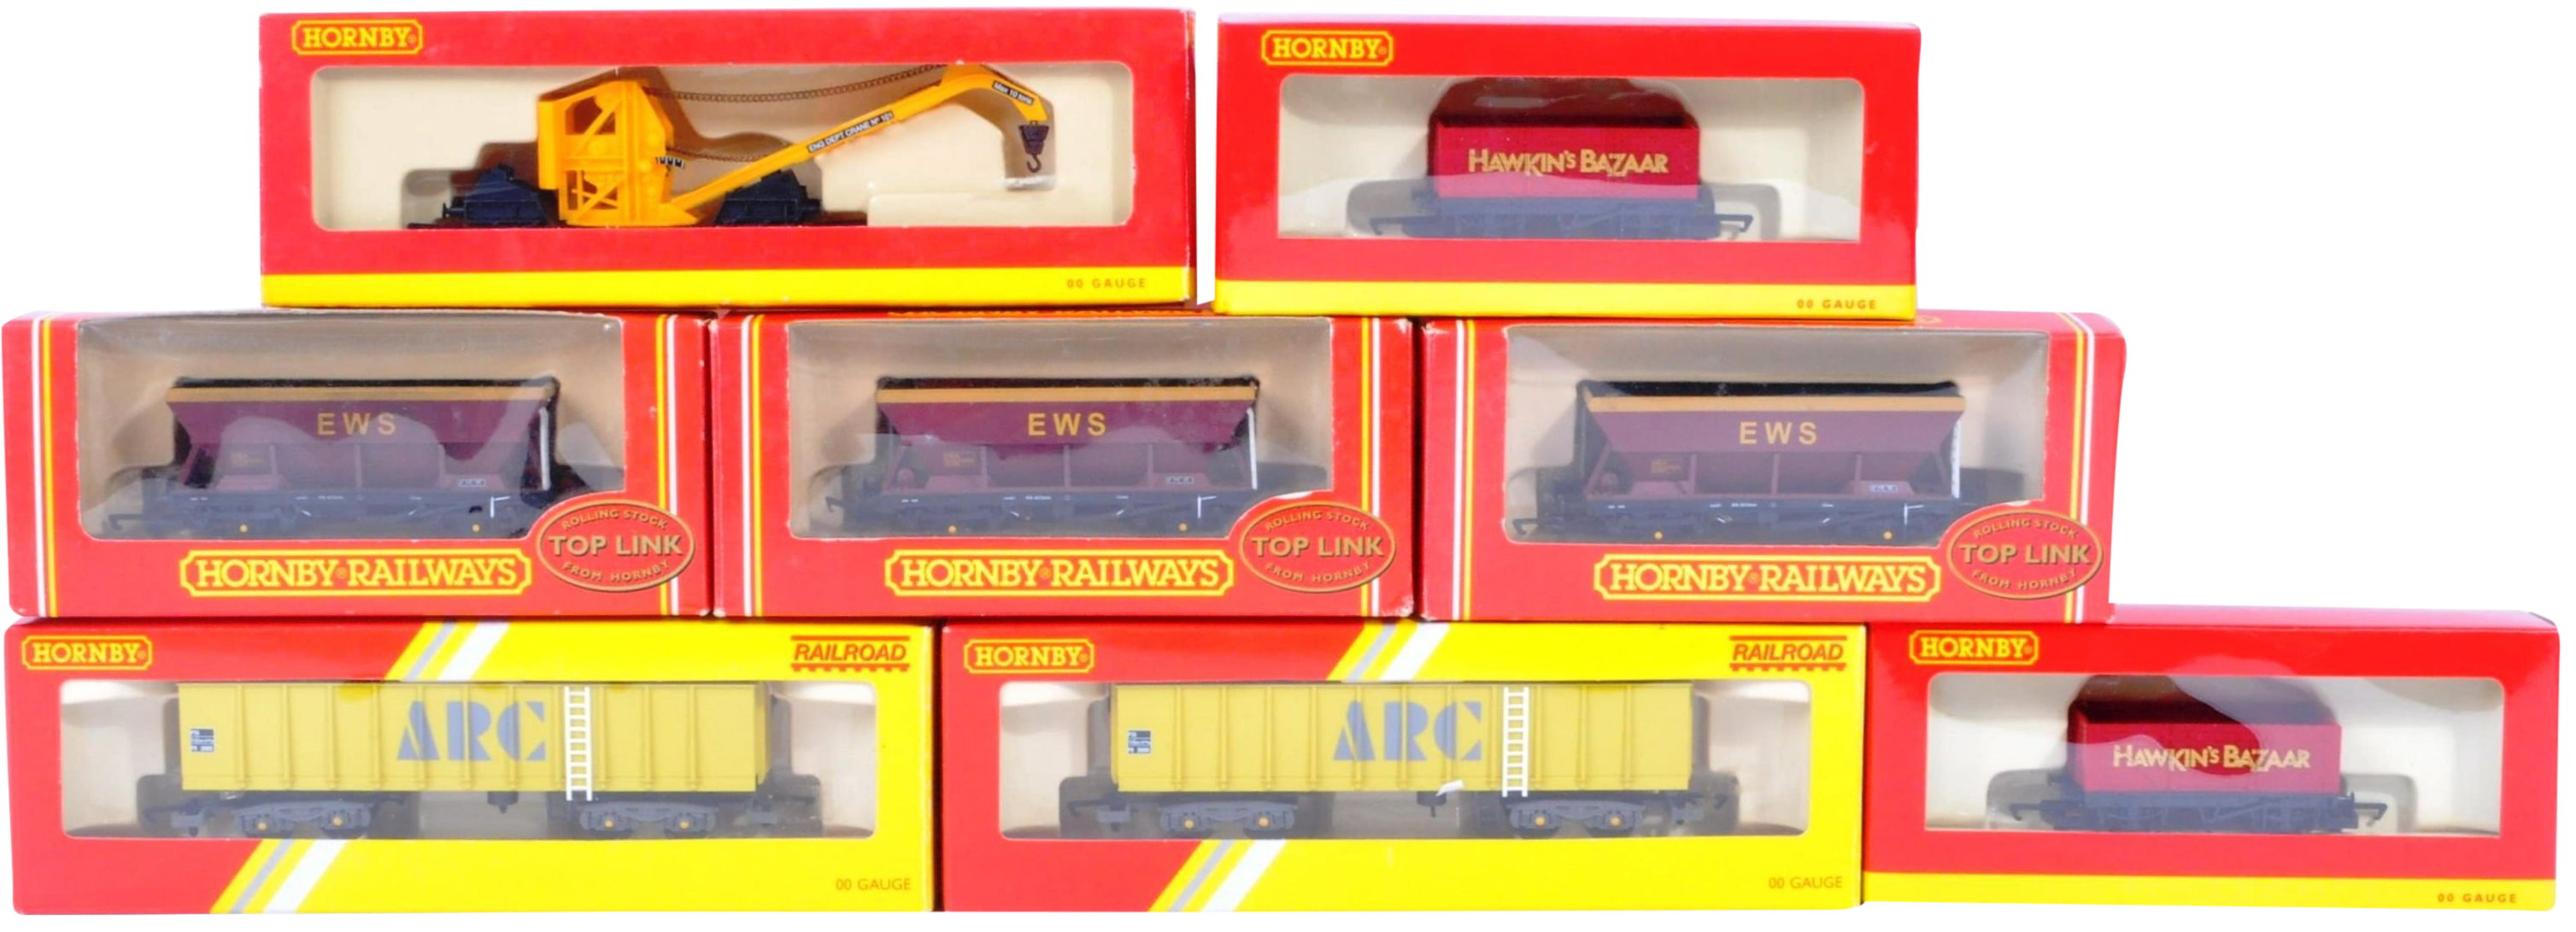 COLLECTION OF HORNBY 00 GAUGE MODEL RAILWAY ROLLING STOCK ITEMS